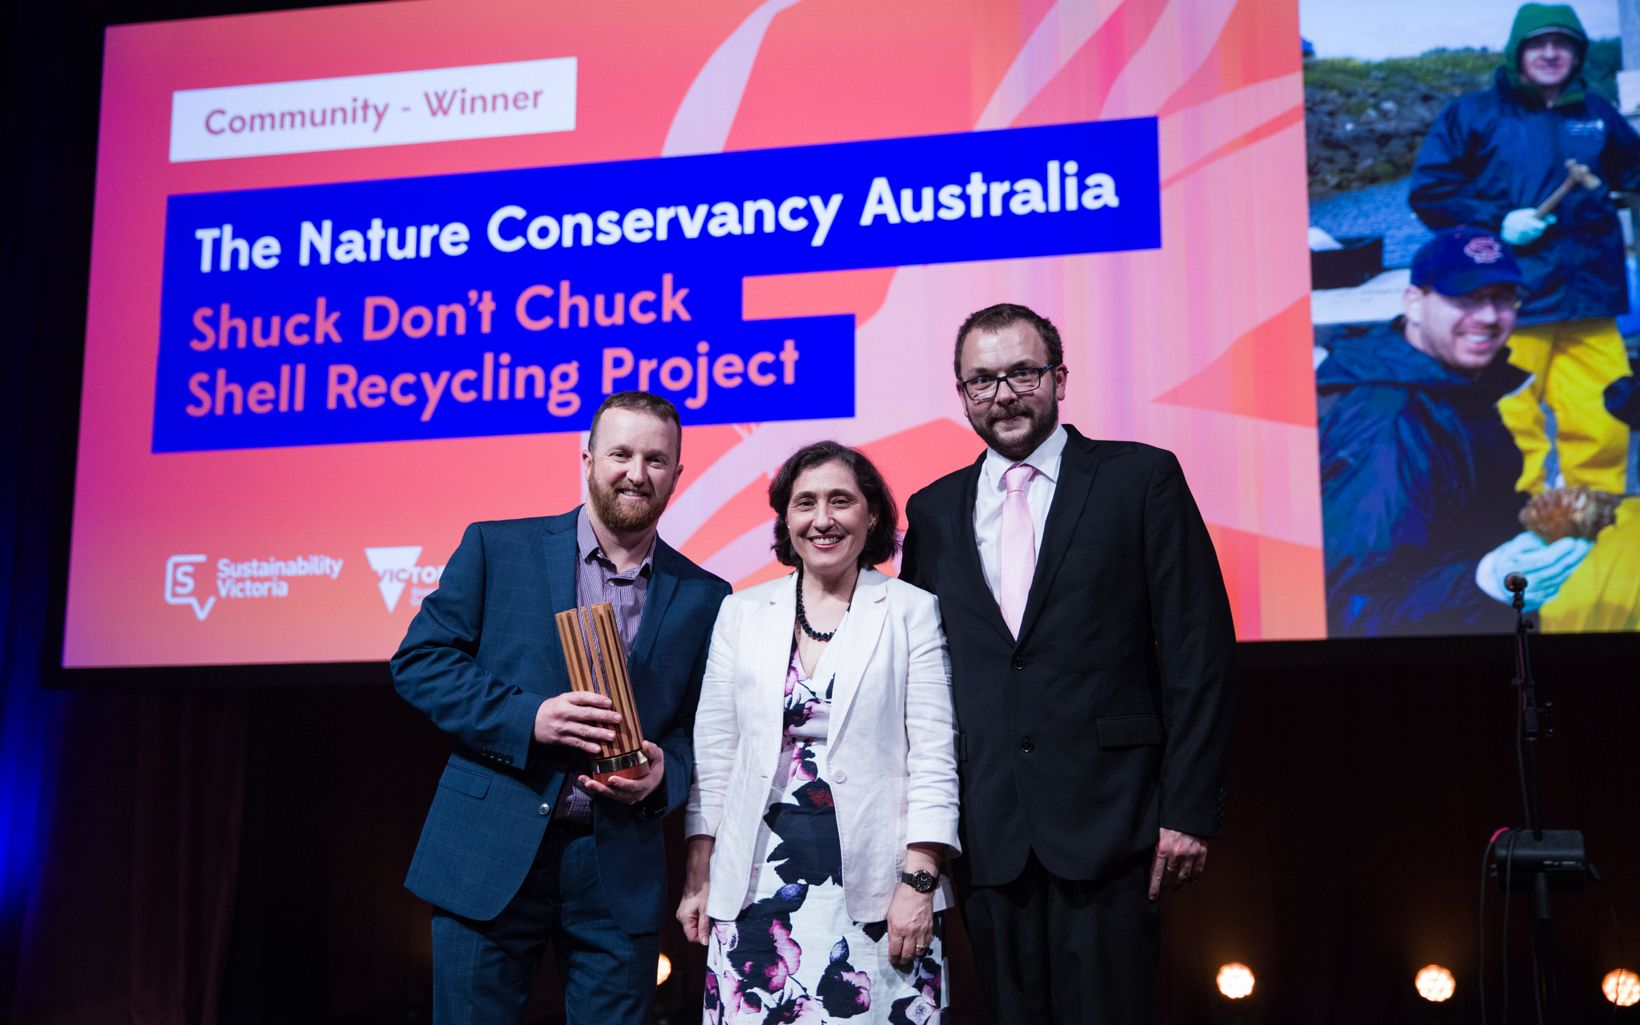 Award winning project In 2017 'Shuck Don't Chuck' was awarded the Victorian Premier's Sustainability Award in the Community Category. © Craig Moodie Photography Pty Ltd